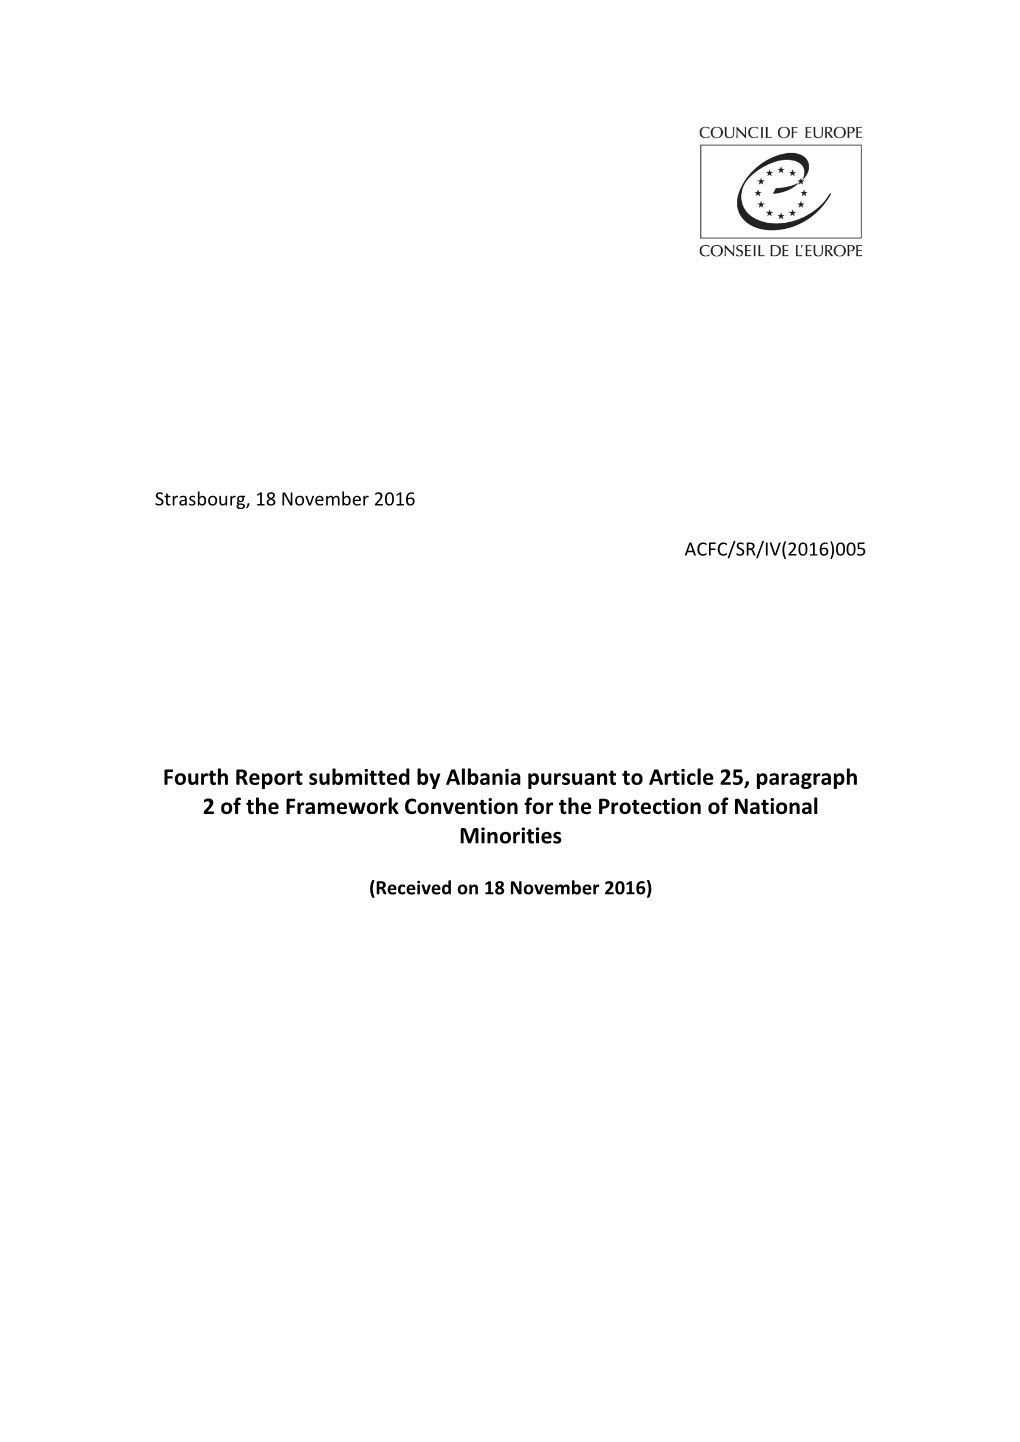 Fourth Report Submitted by Albania Pursuant to Article 25, Paragraph 2 of the Framework Convention for the Protection of National Minorities